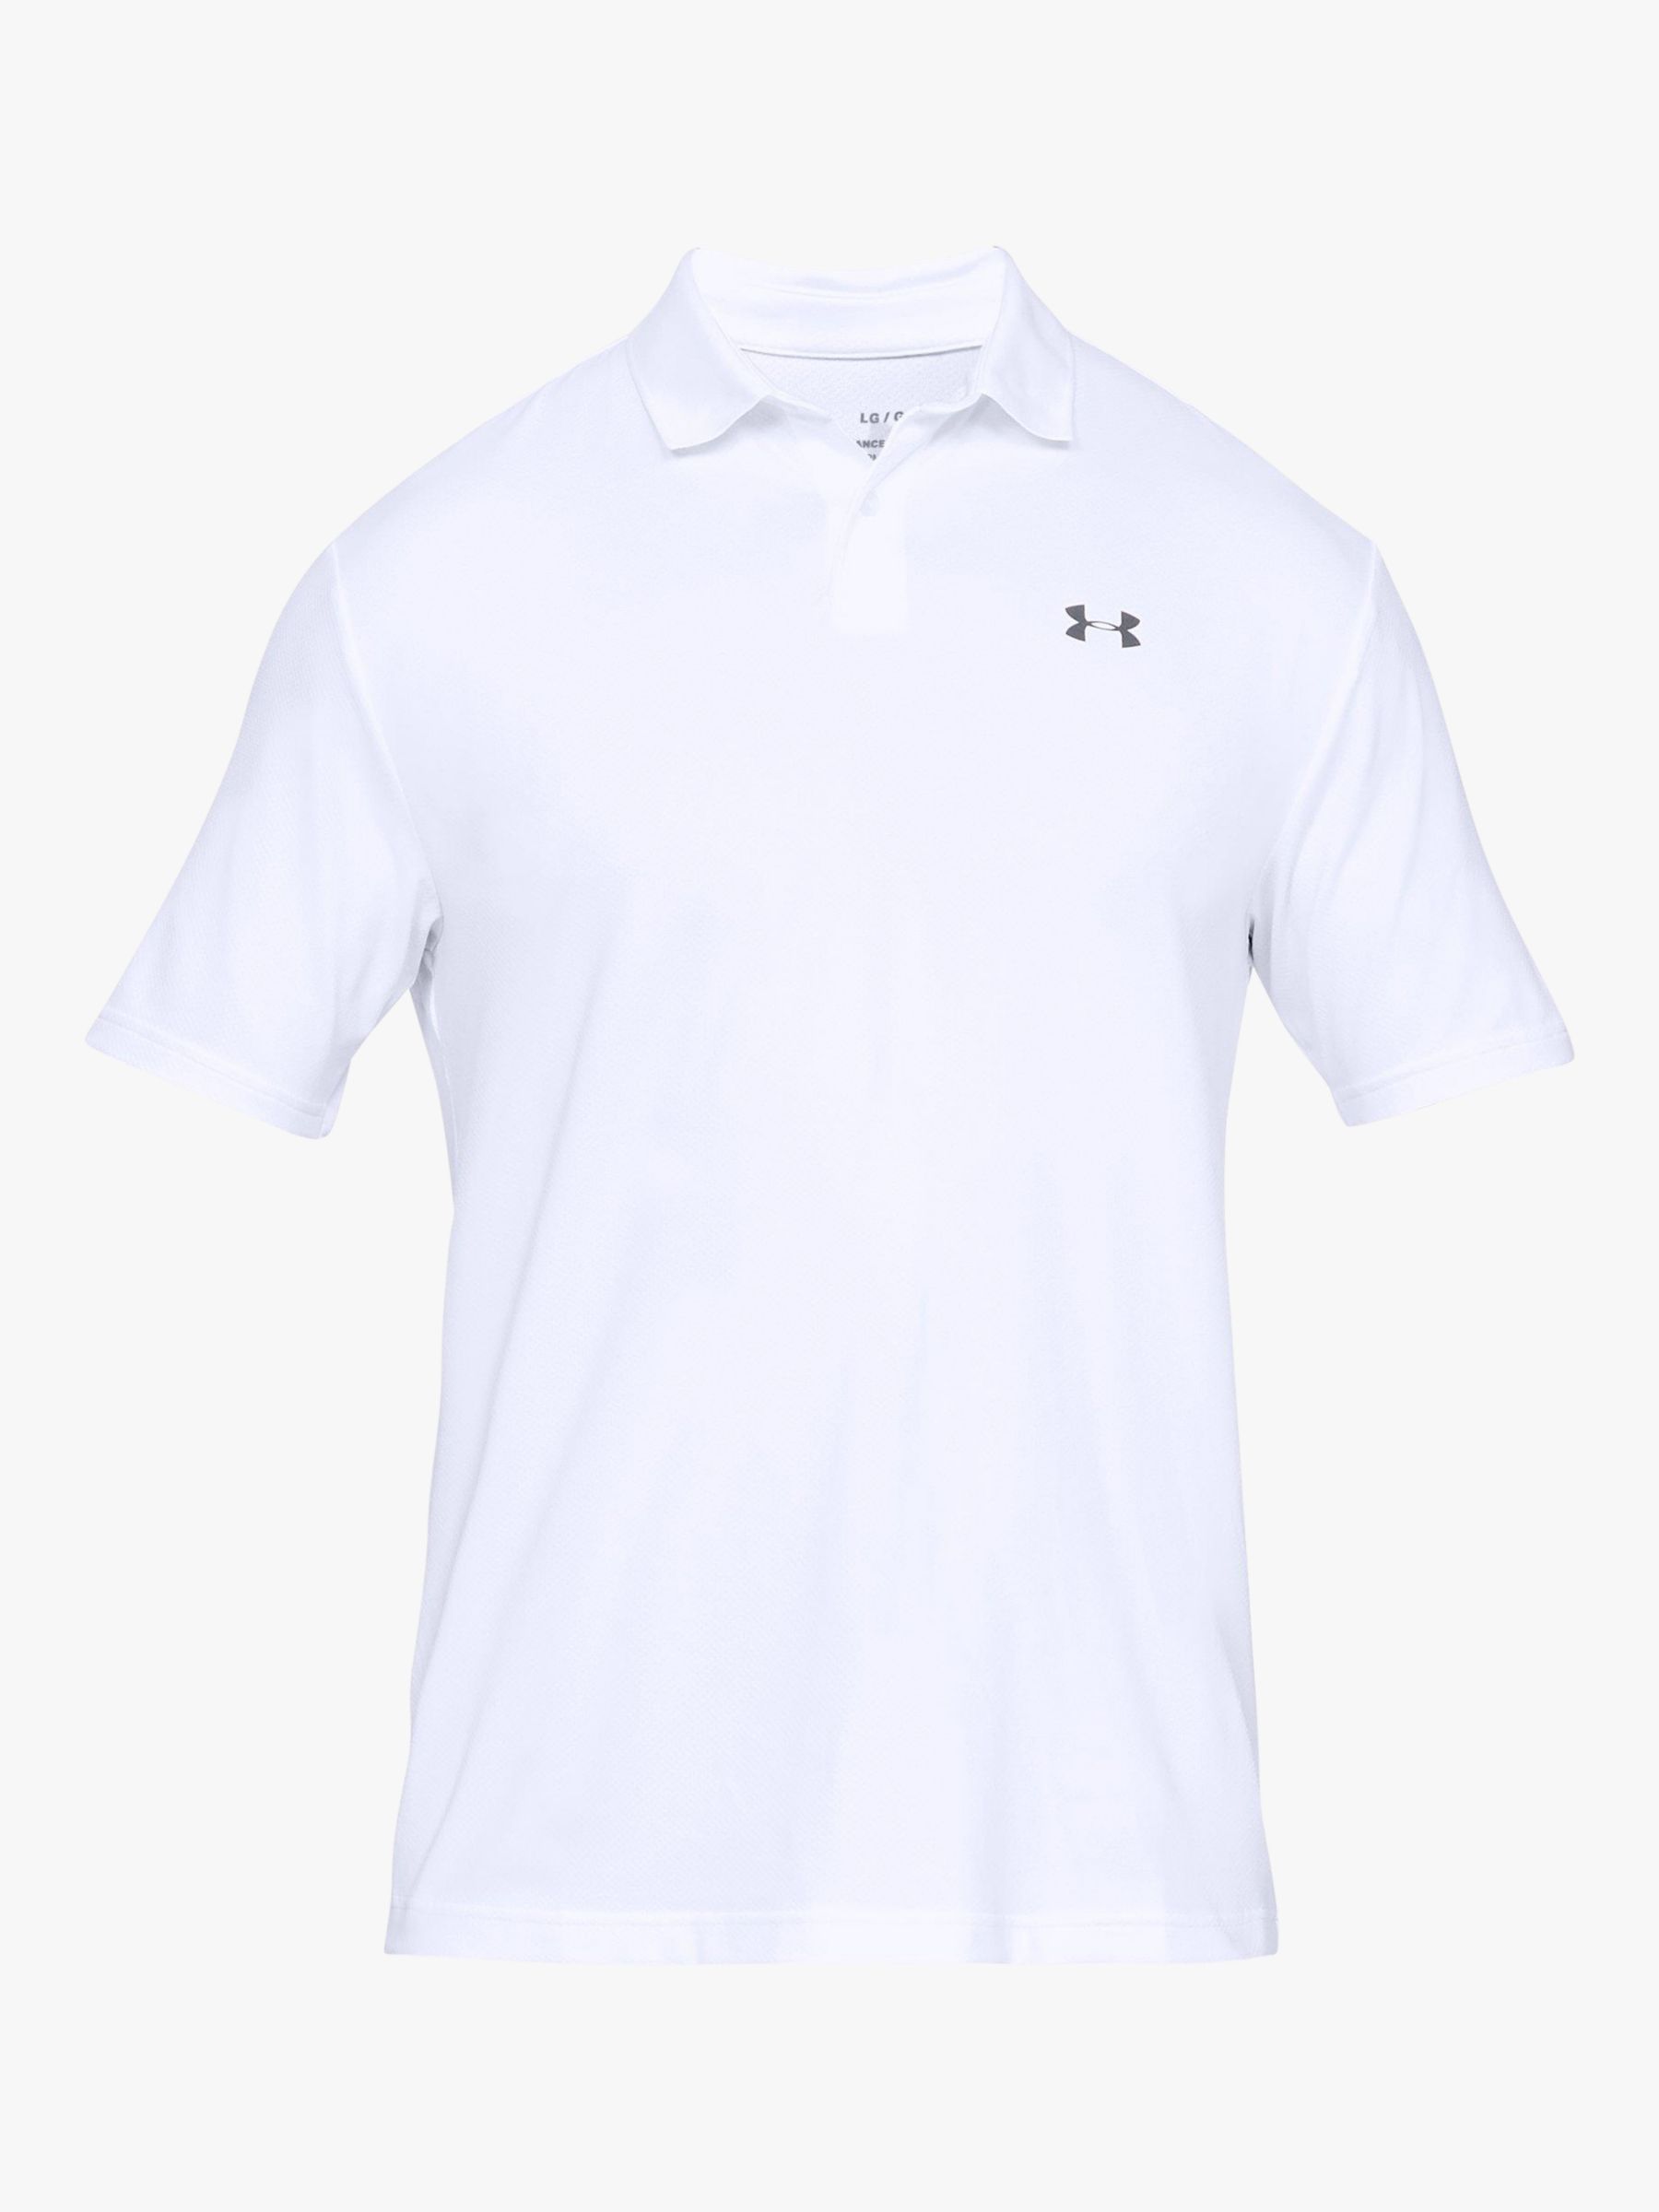 under armour white top